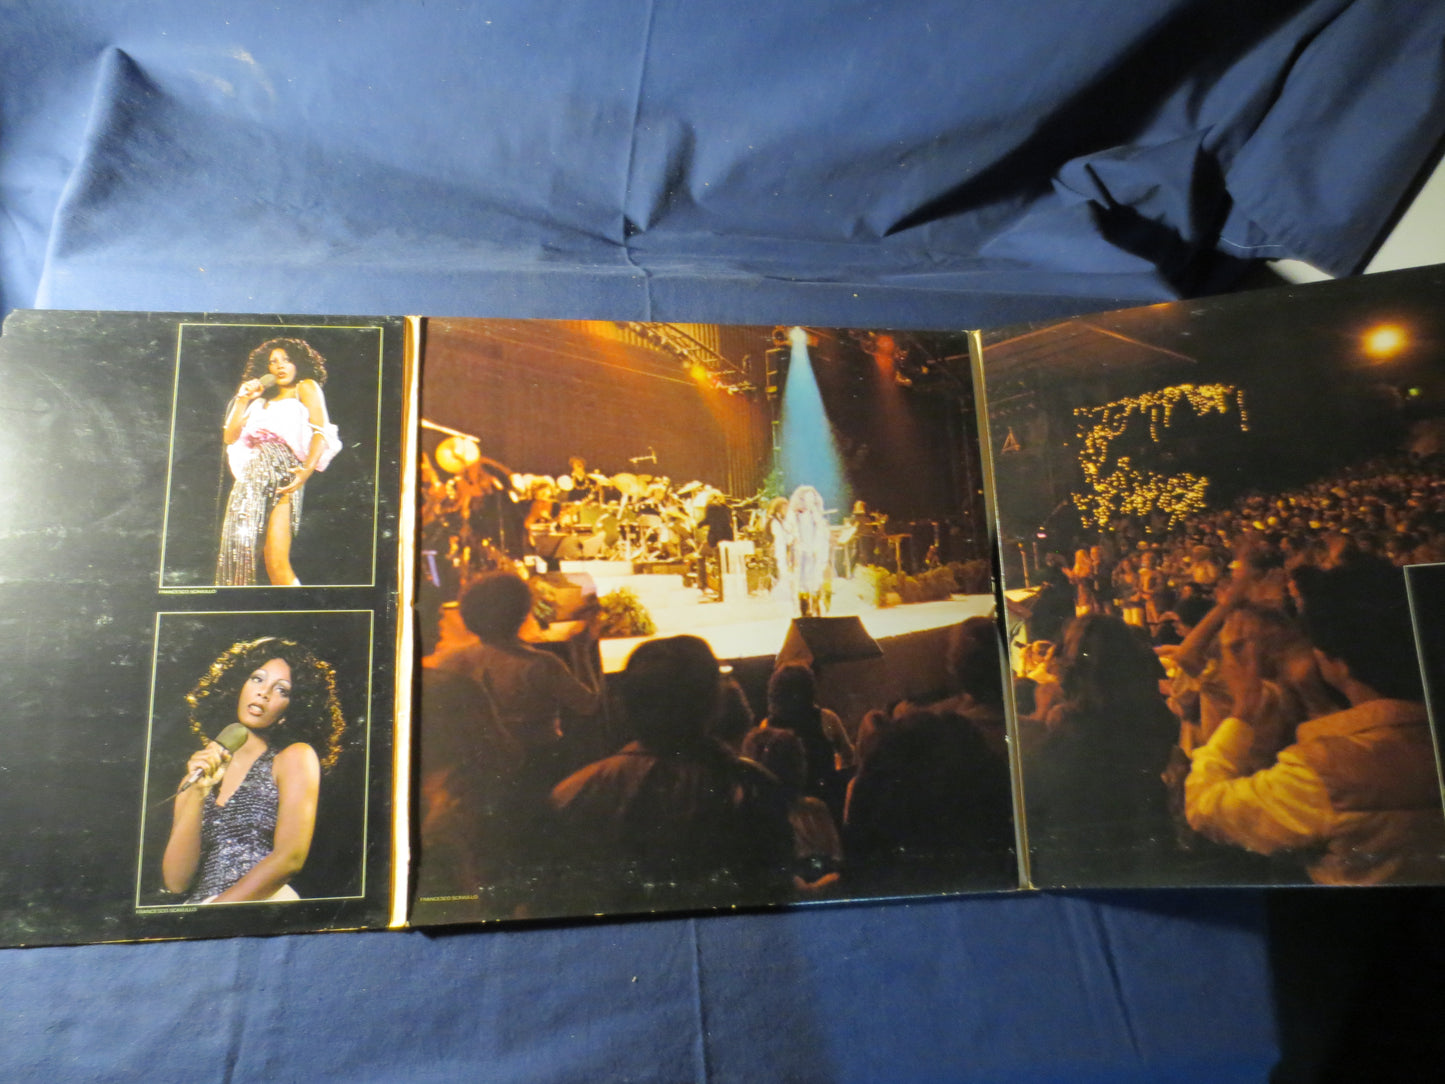 DONNA SUMMER, LIVE and More, Donna Summer Record, Donna Summer Album, Donna Summer Lp, Disco Records Pop Lp, 1977 Records